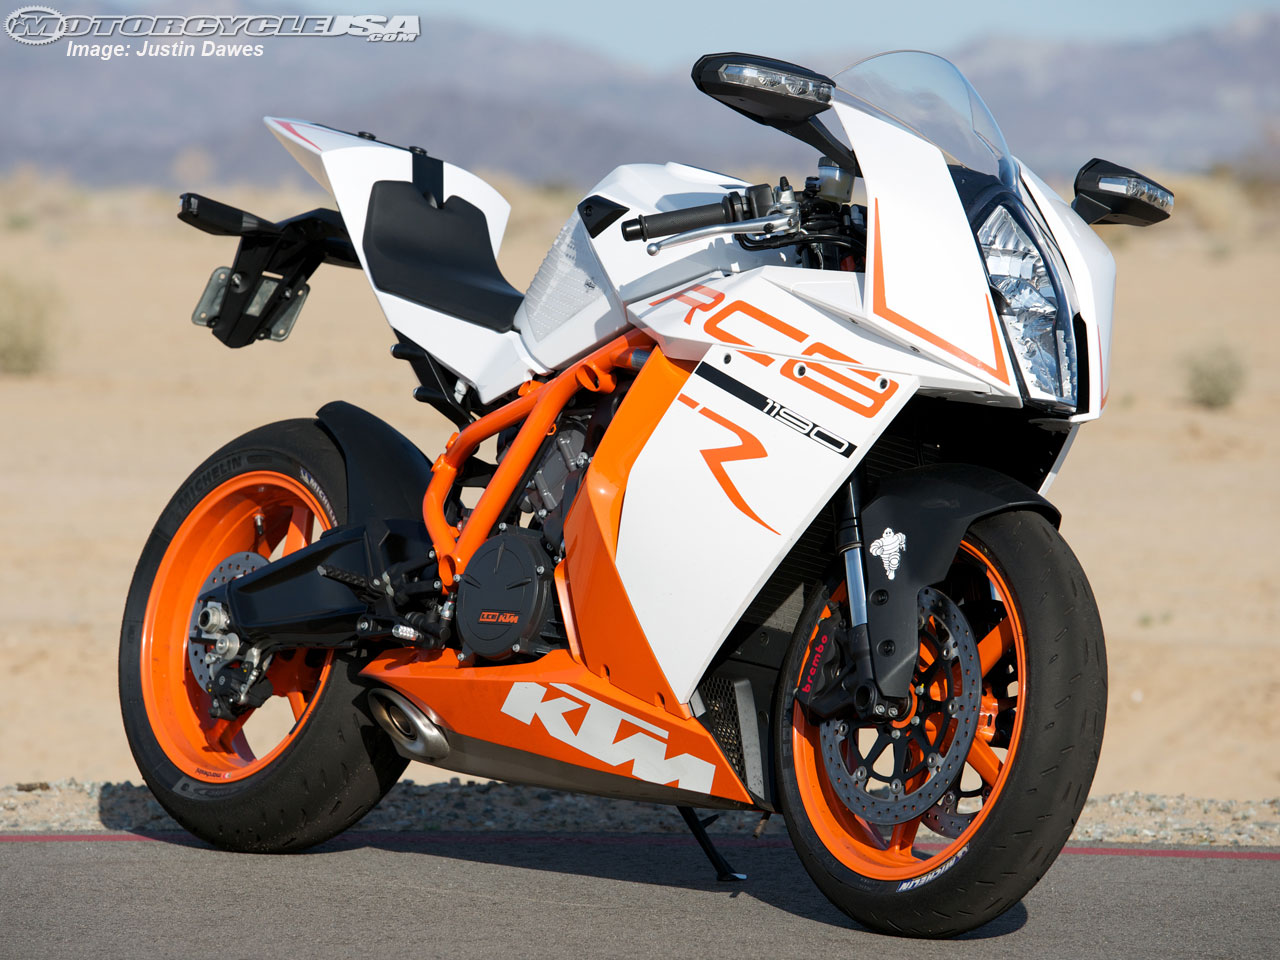 Ktm Rc 8 Price In India - HD Wallpaper 